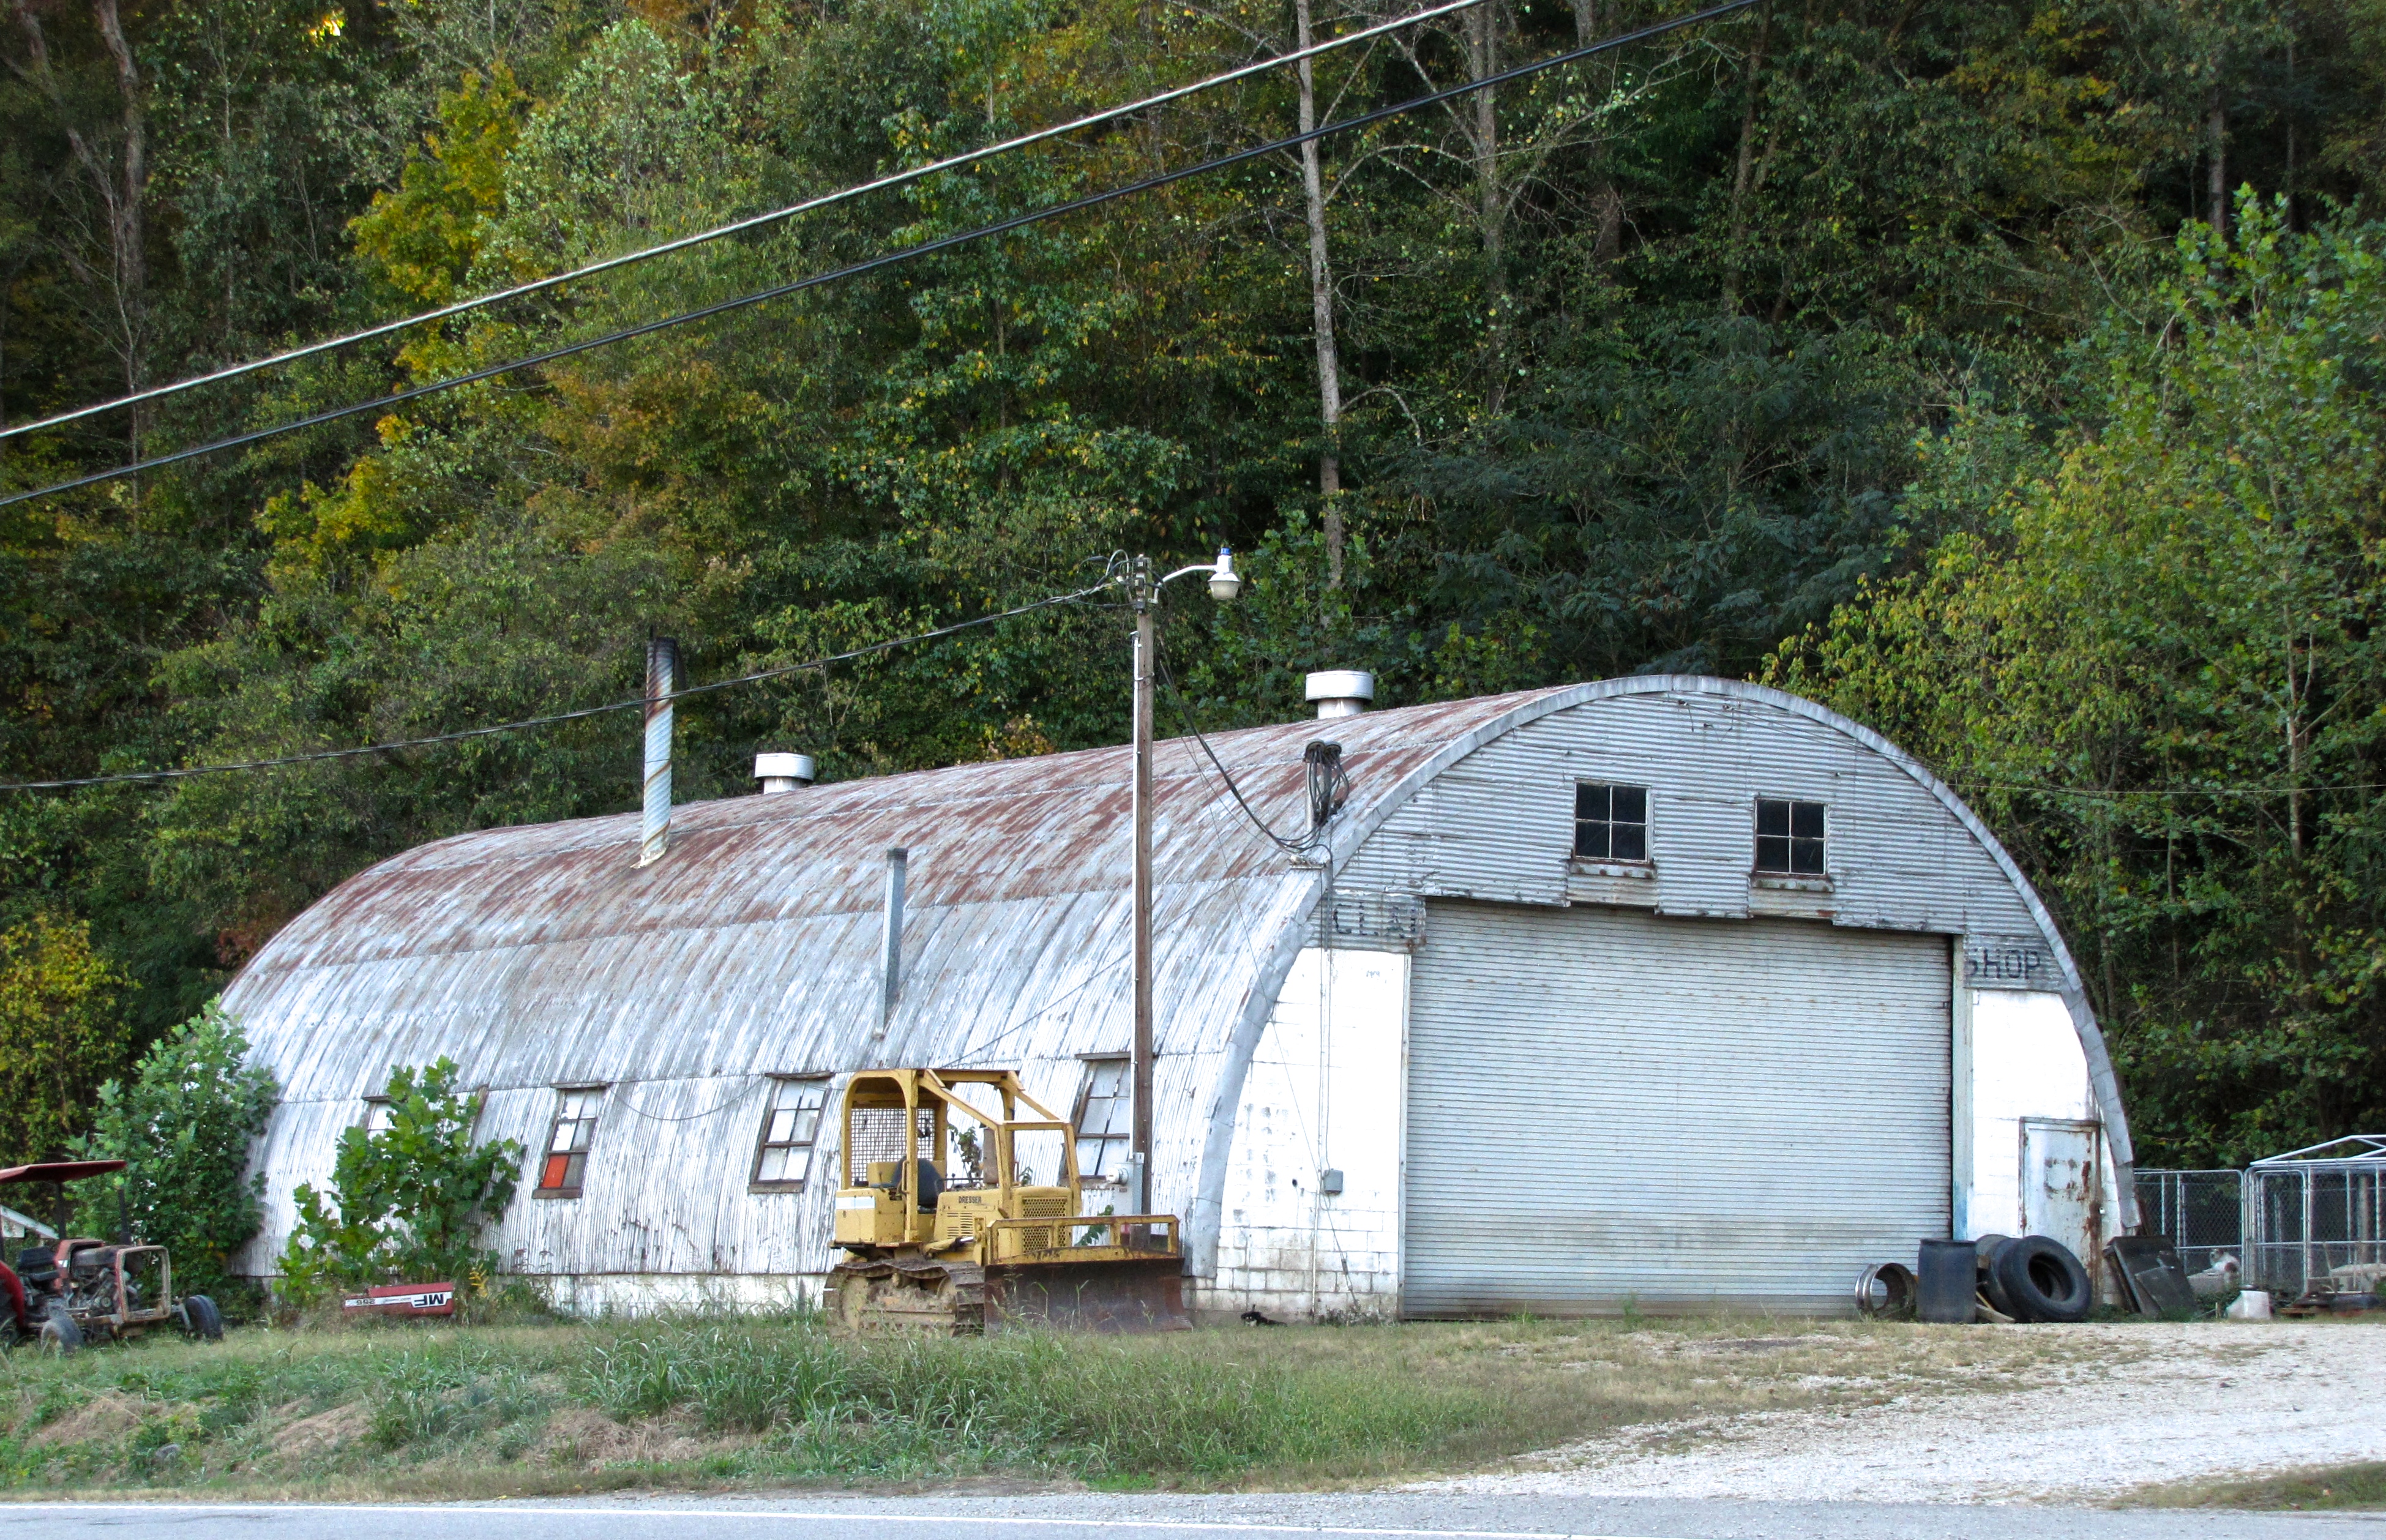 quonset hut in Sussex, WI